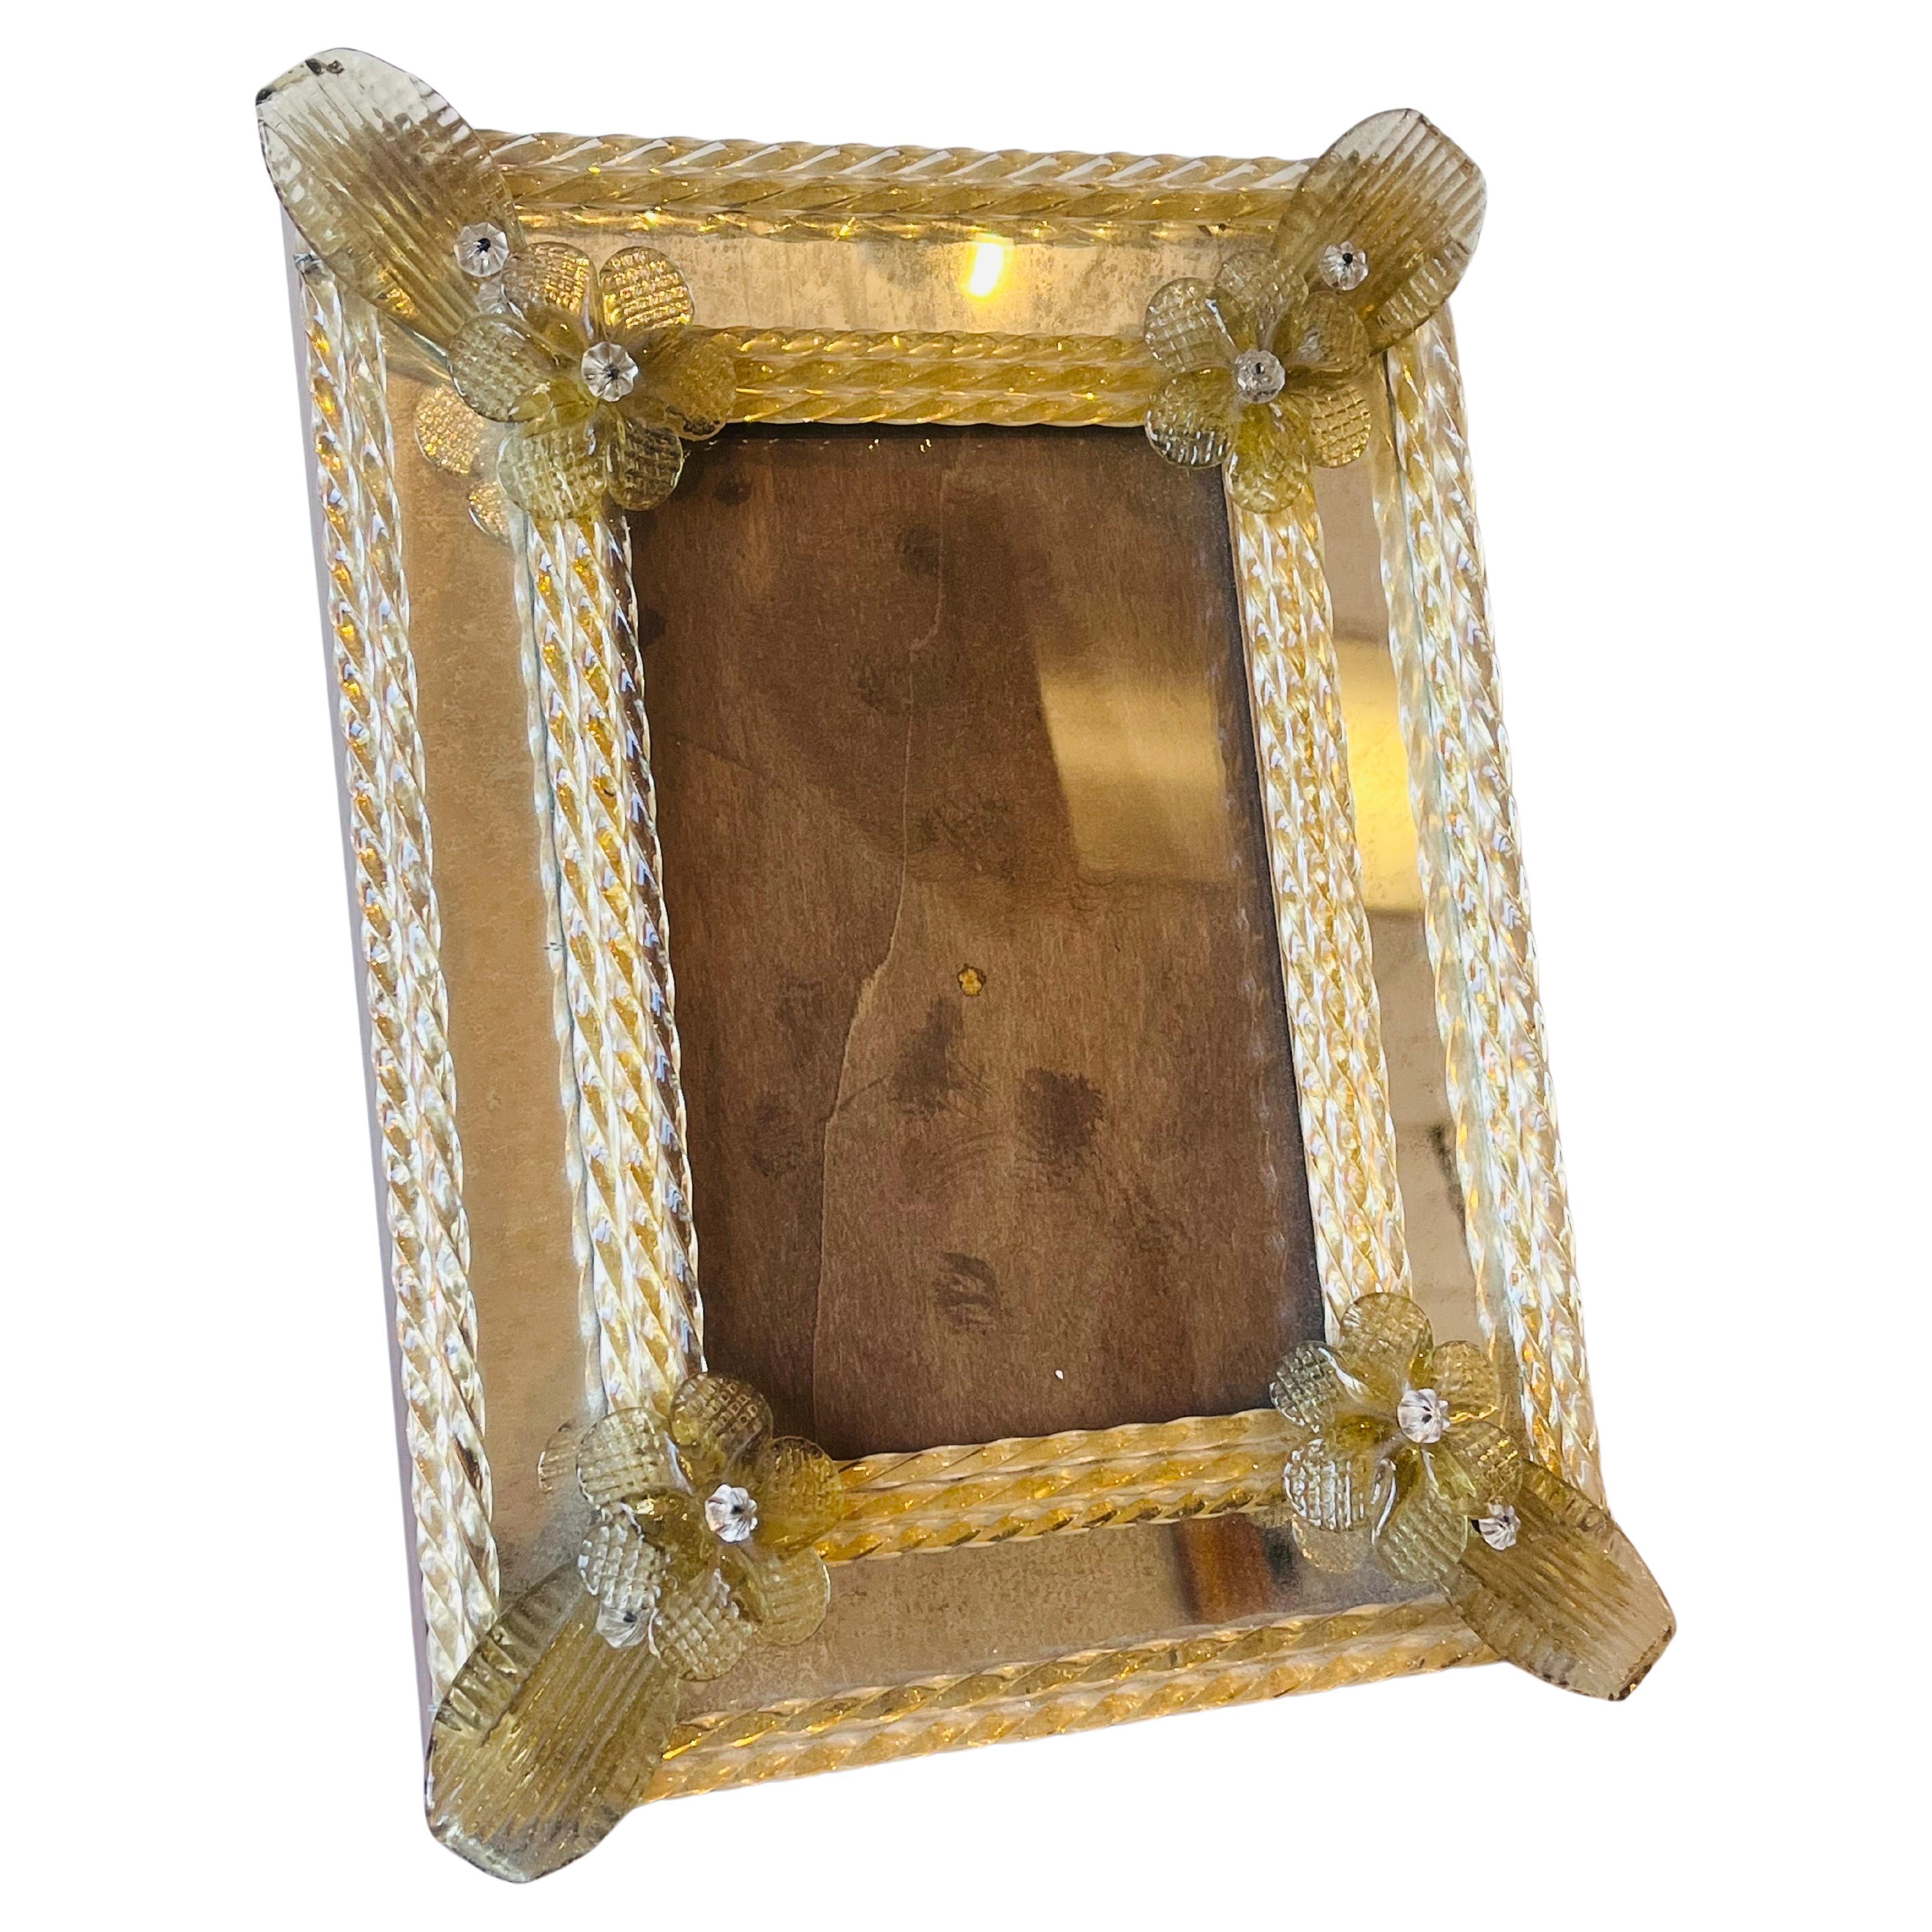 Ornate Venetian Murano Glass Picture or Photograph Frame Desk or Table Accessory